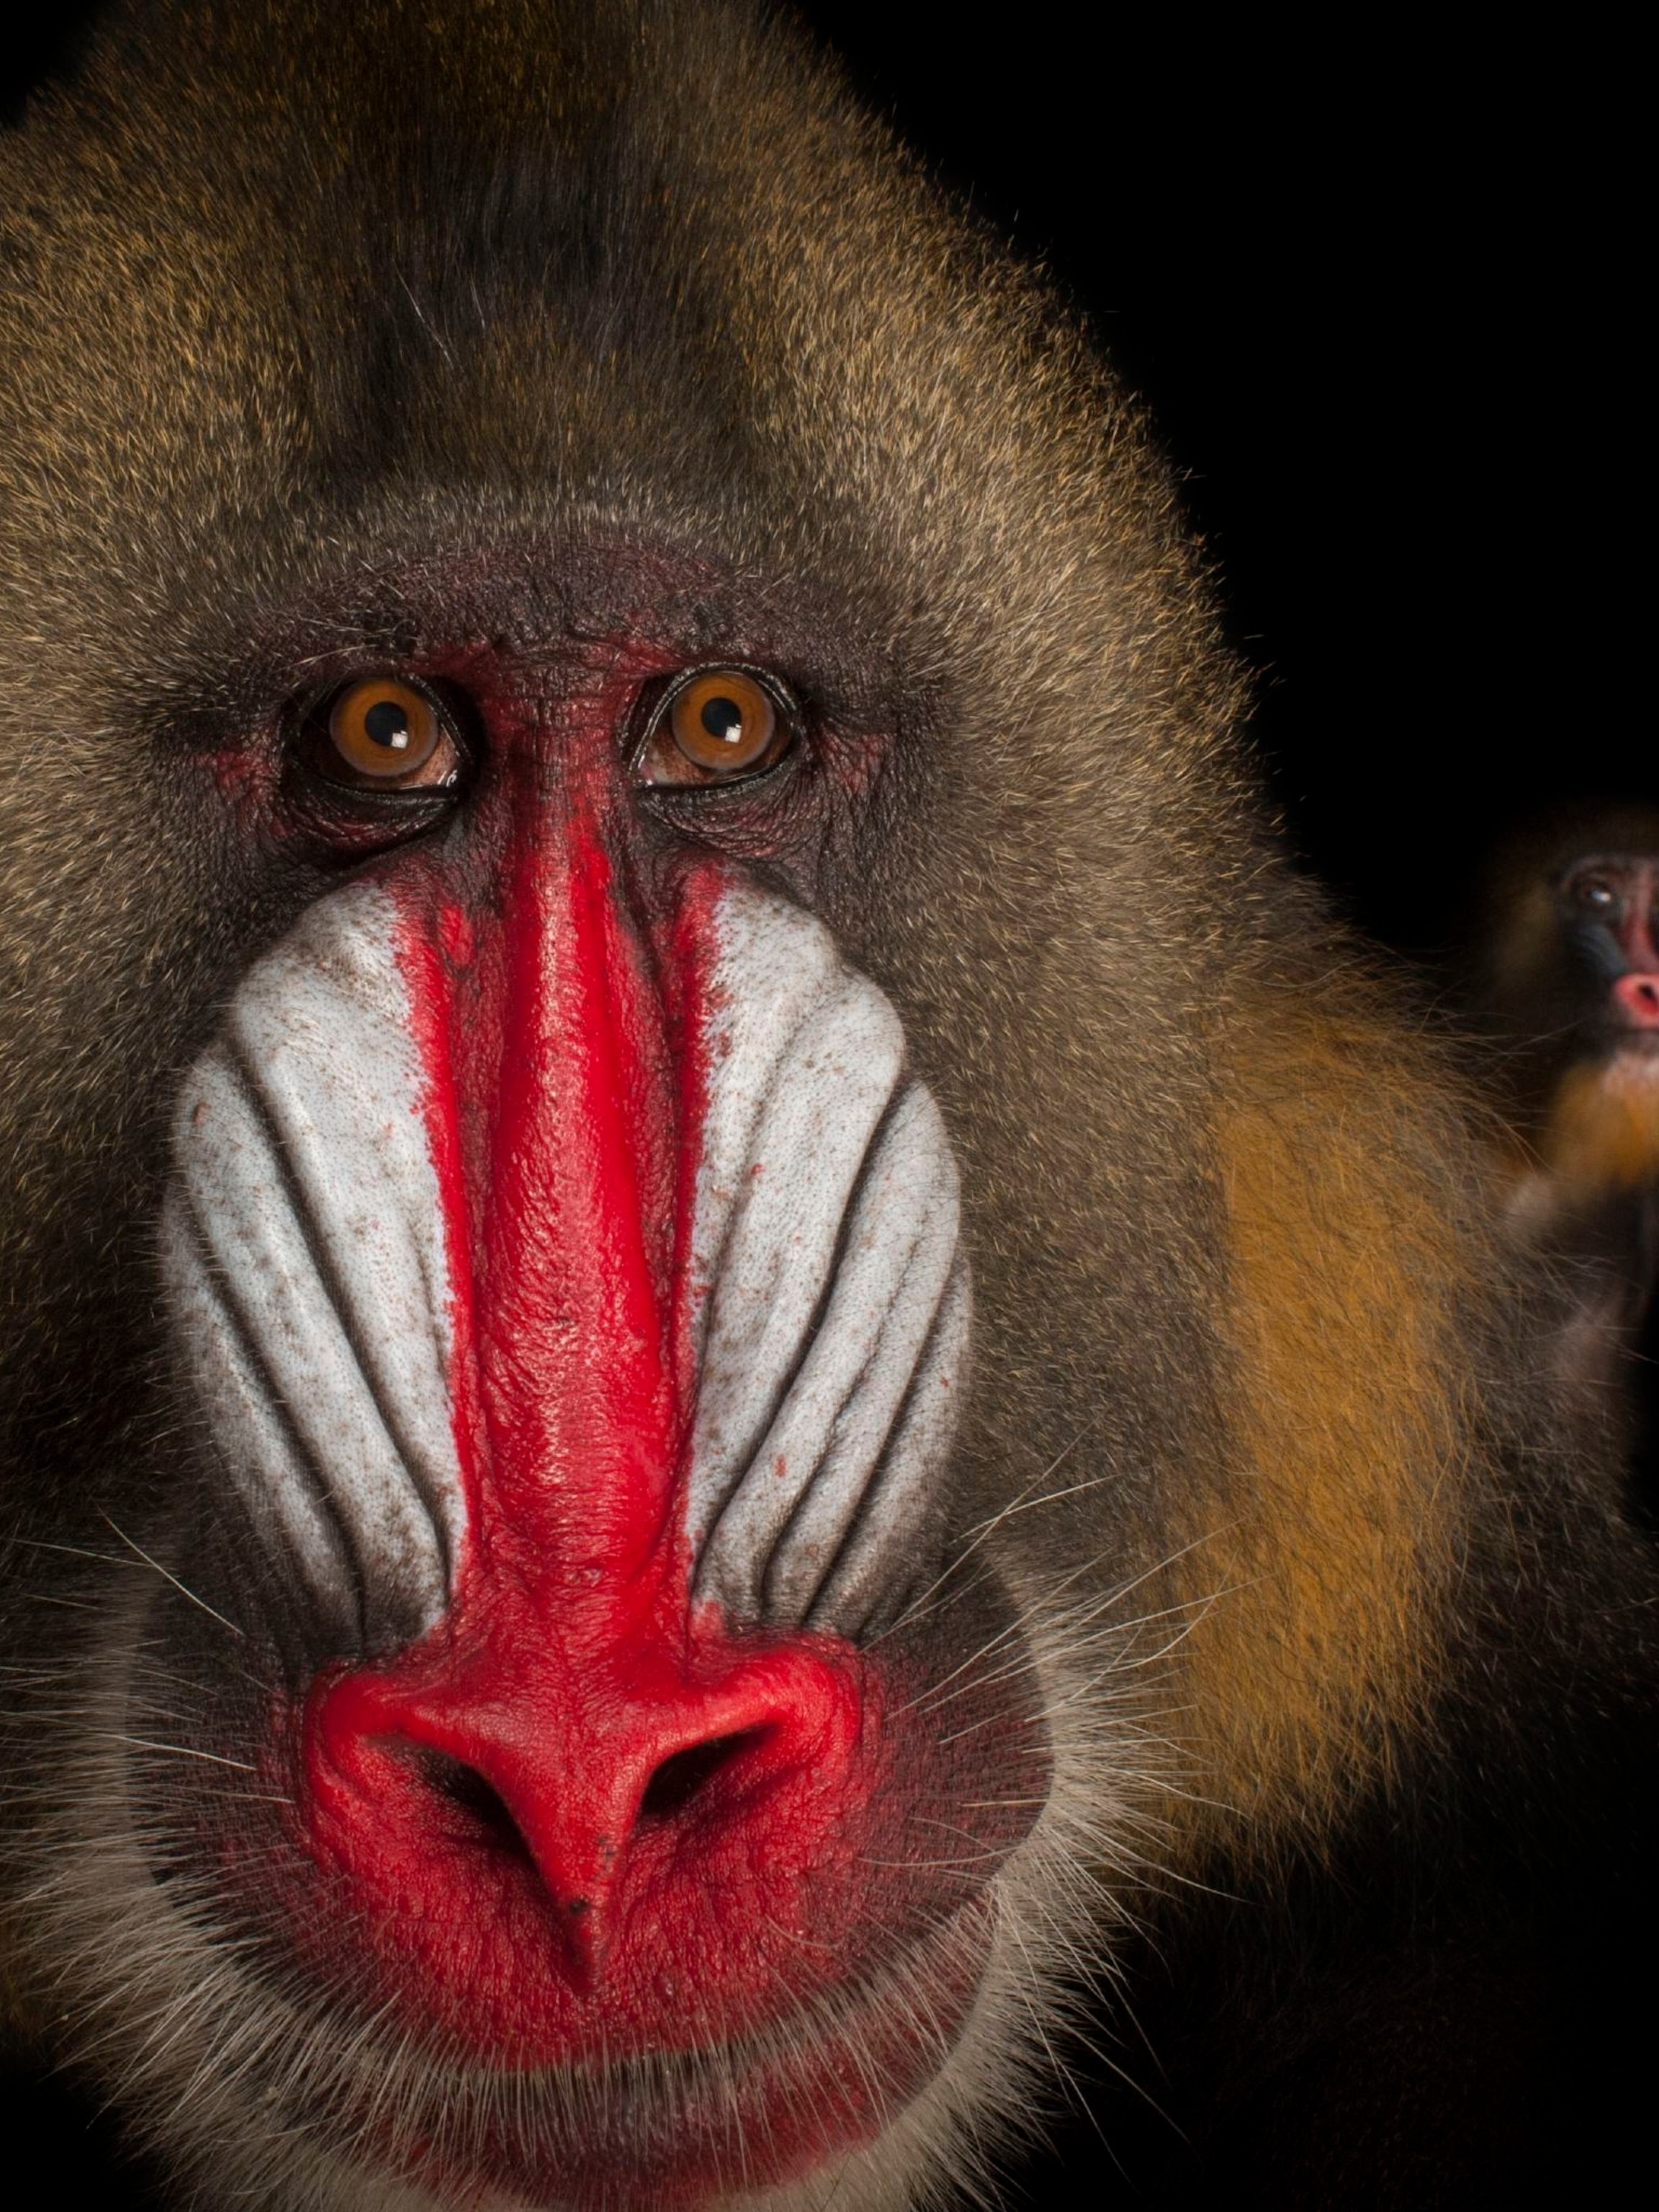 What type of animal is a mandrill?